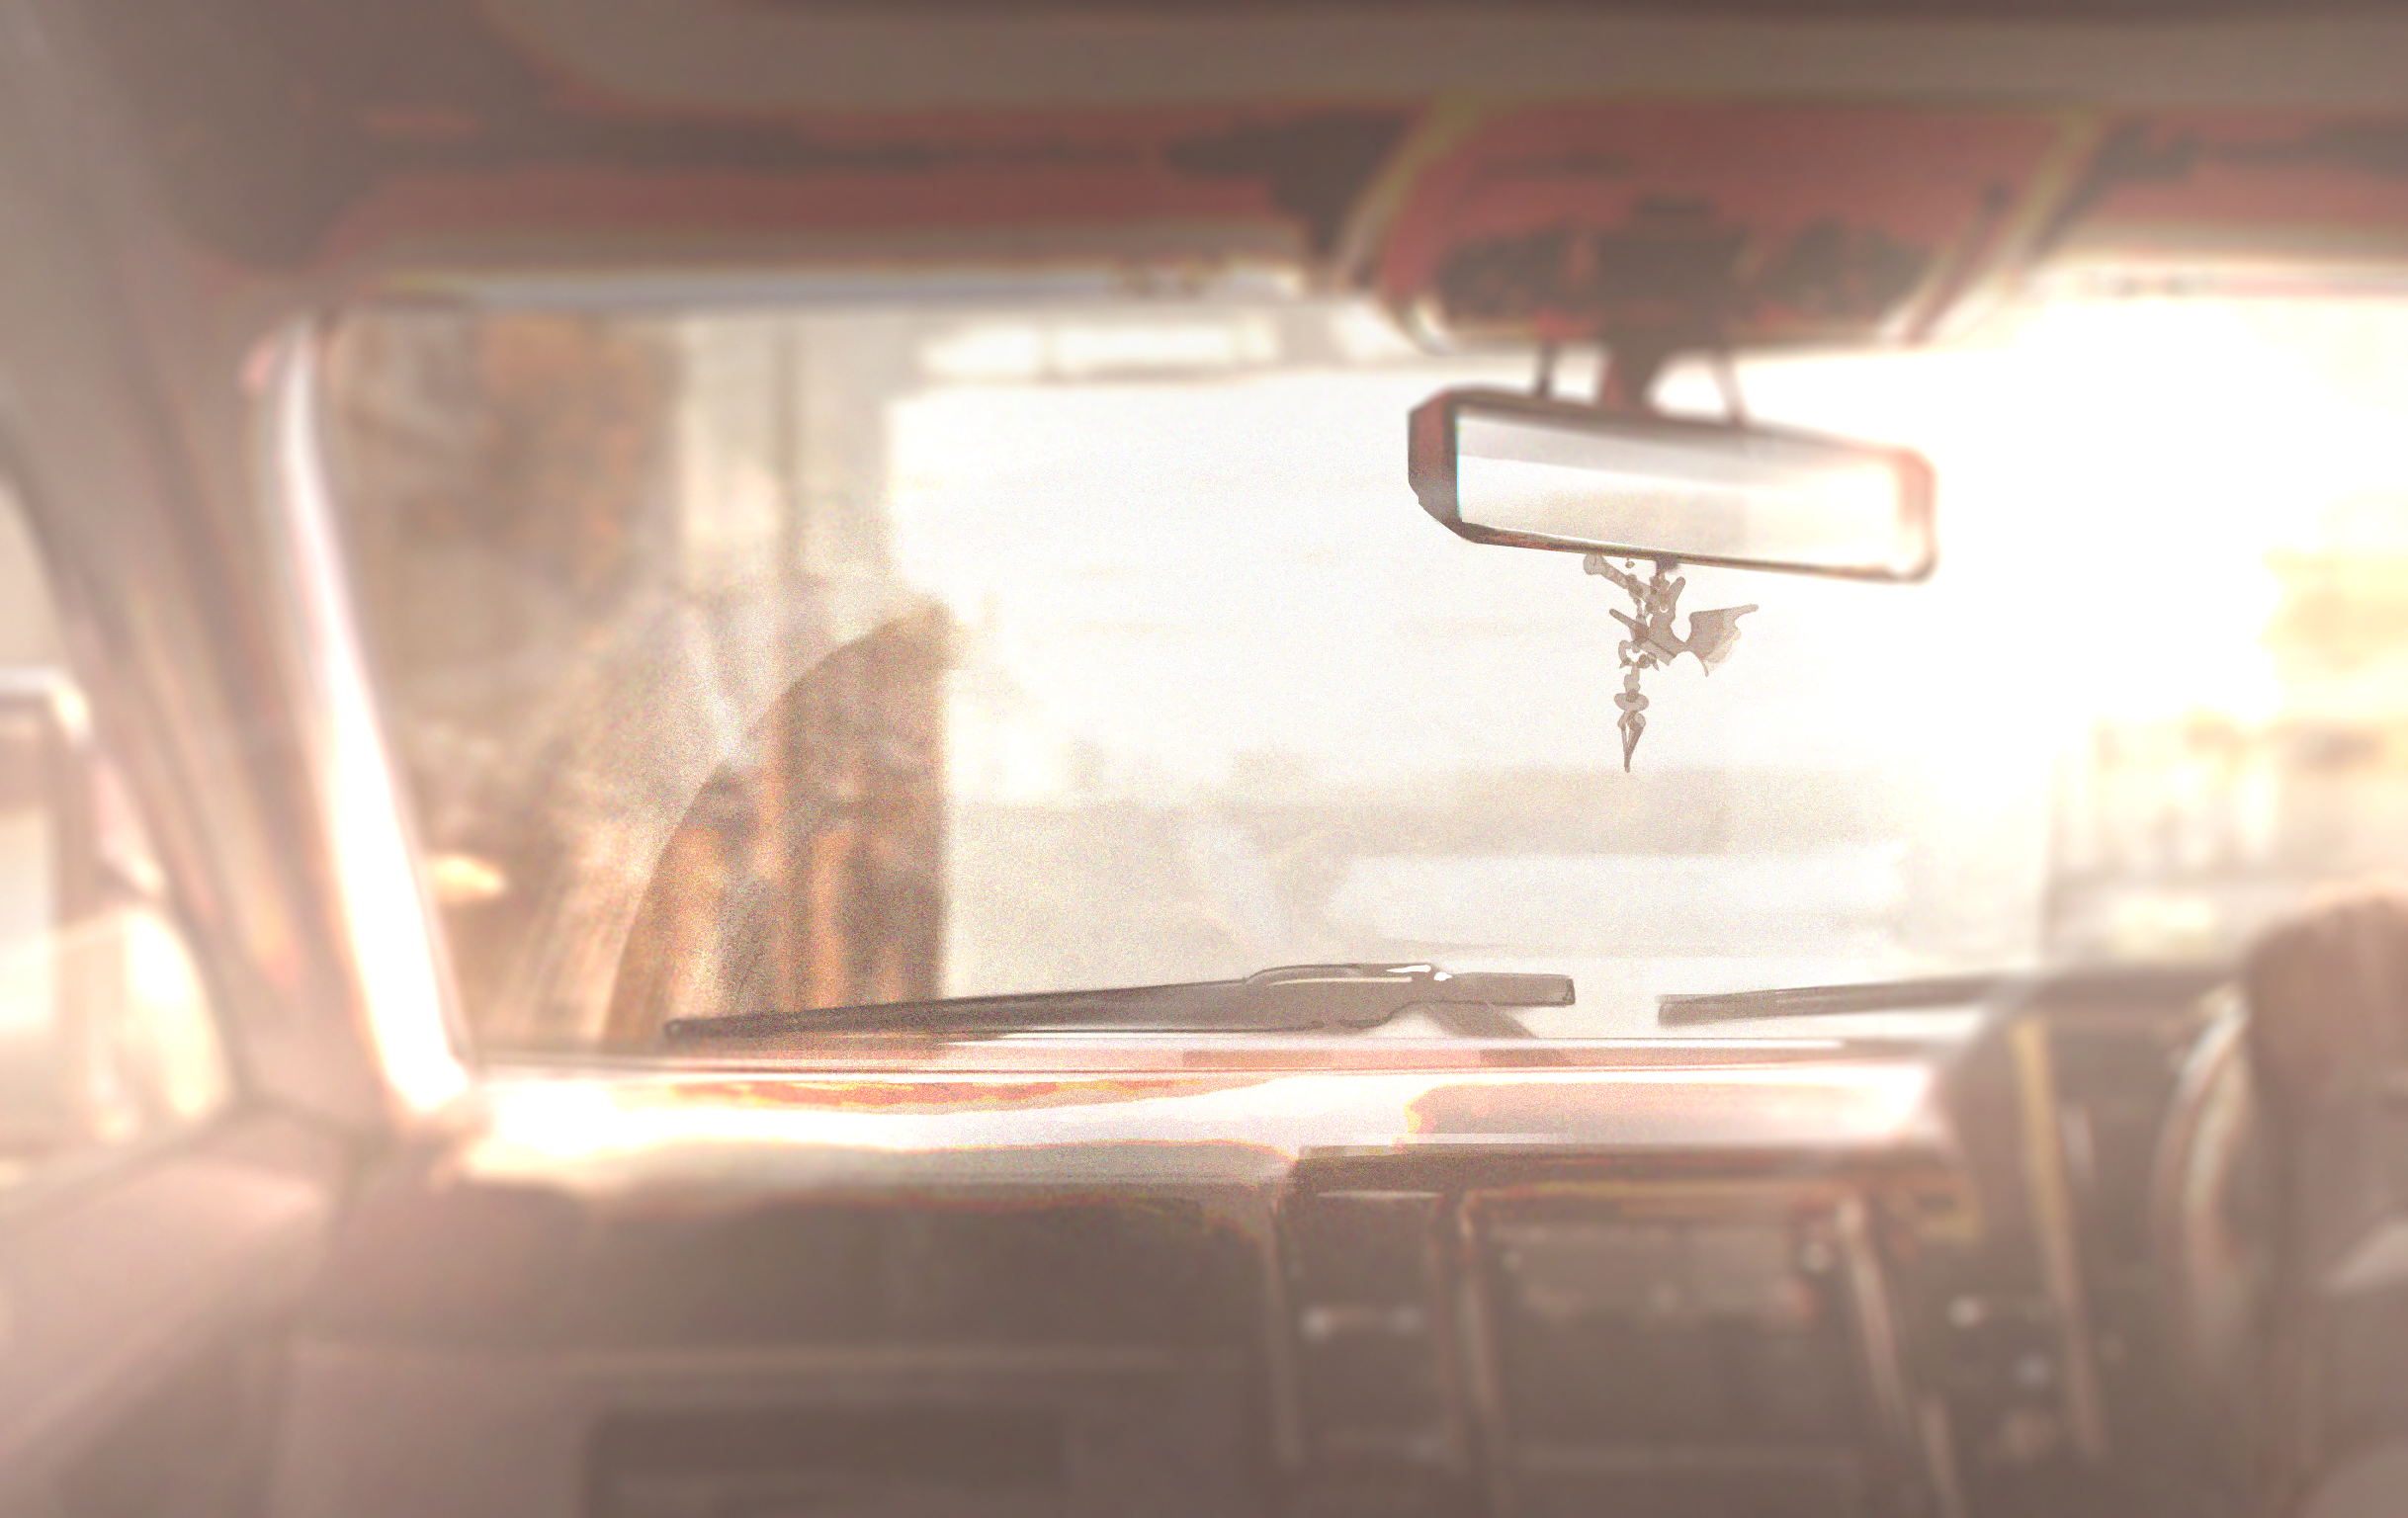 Anime 2436x1536 MBCC Path to Nowhere anime games video games video game art car interior